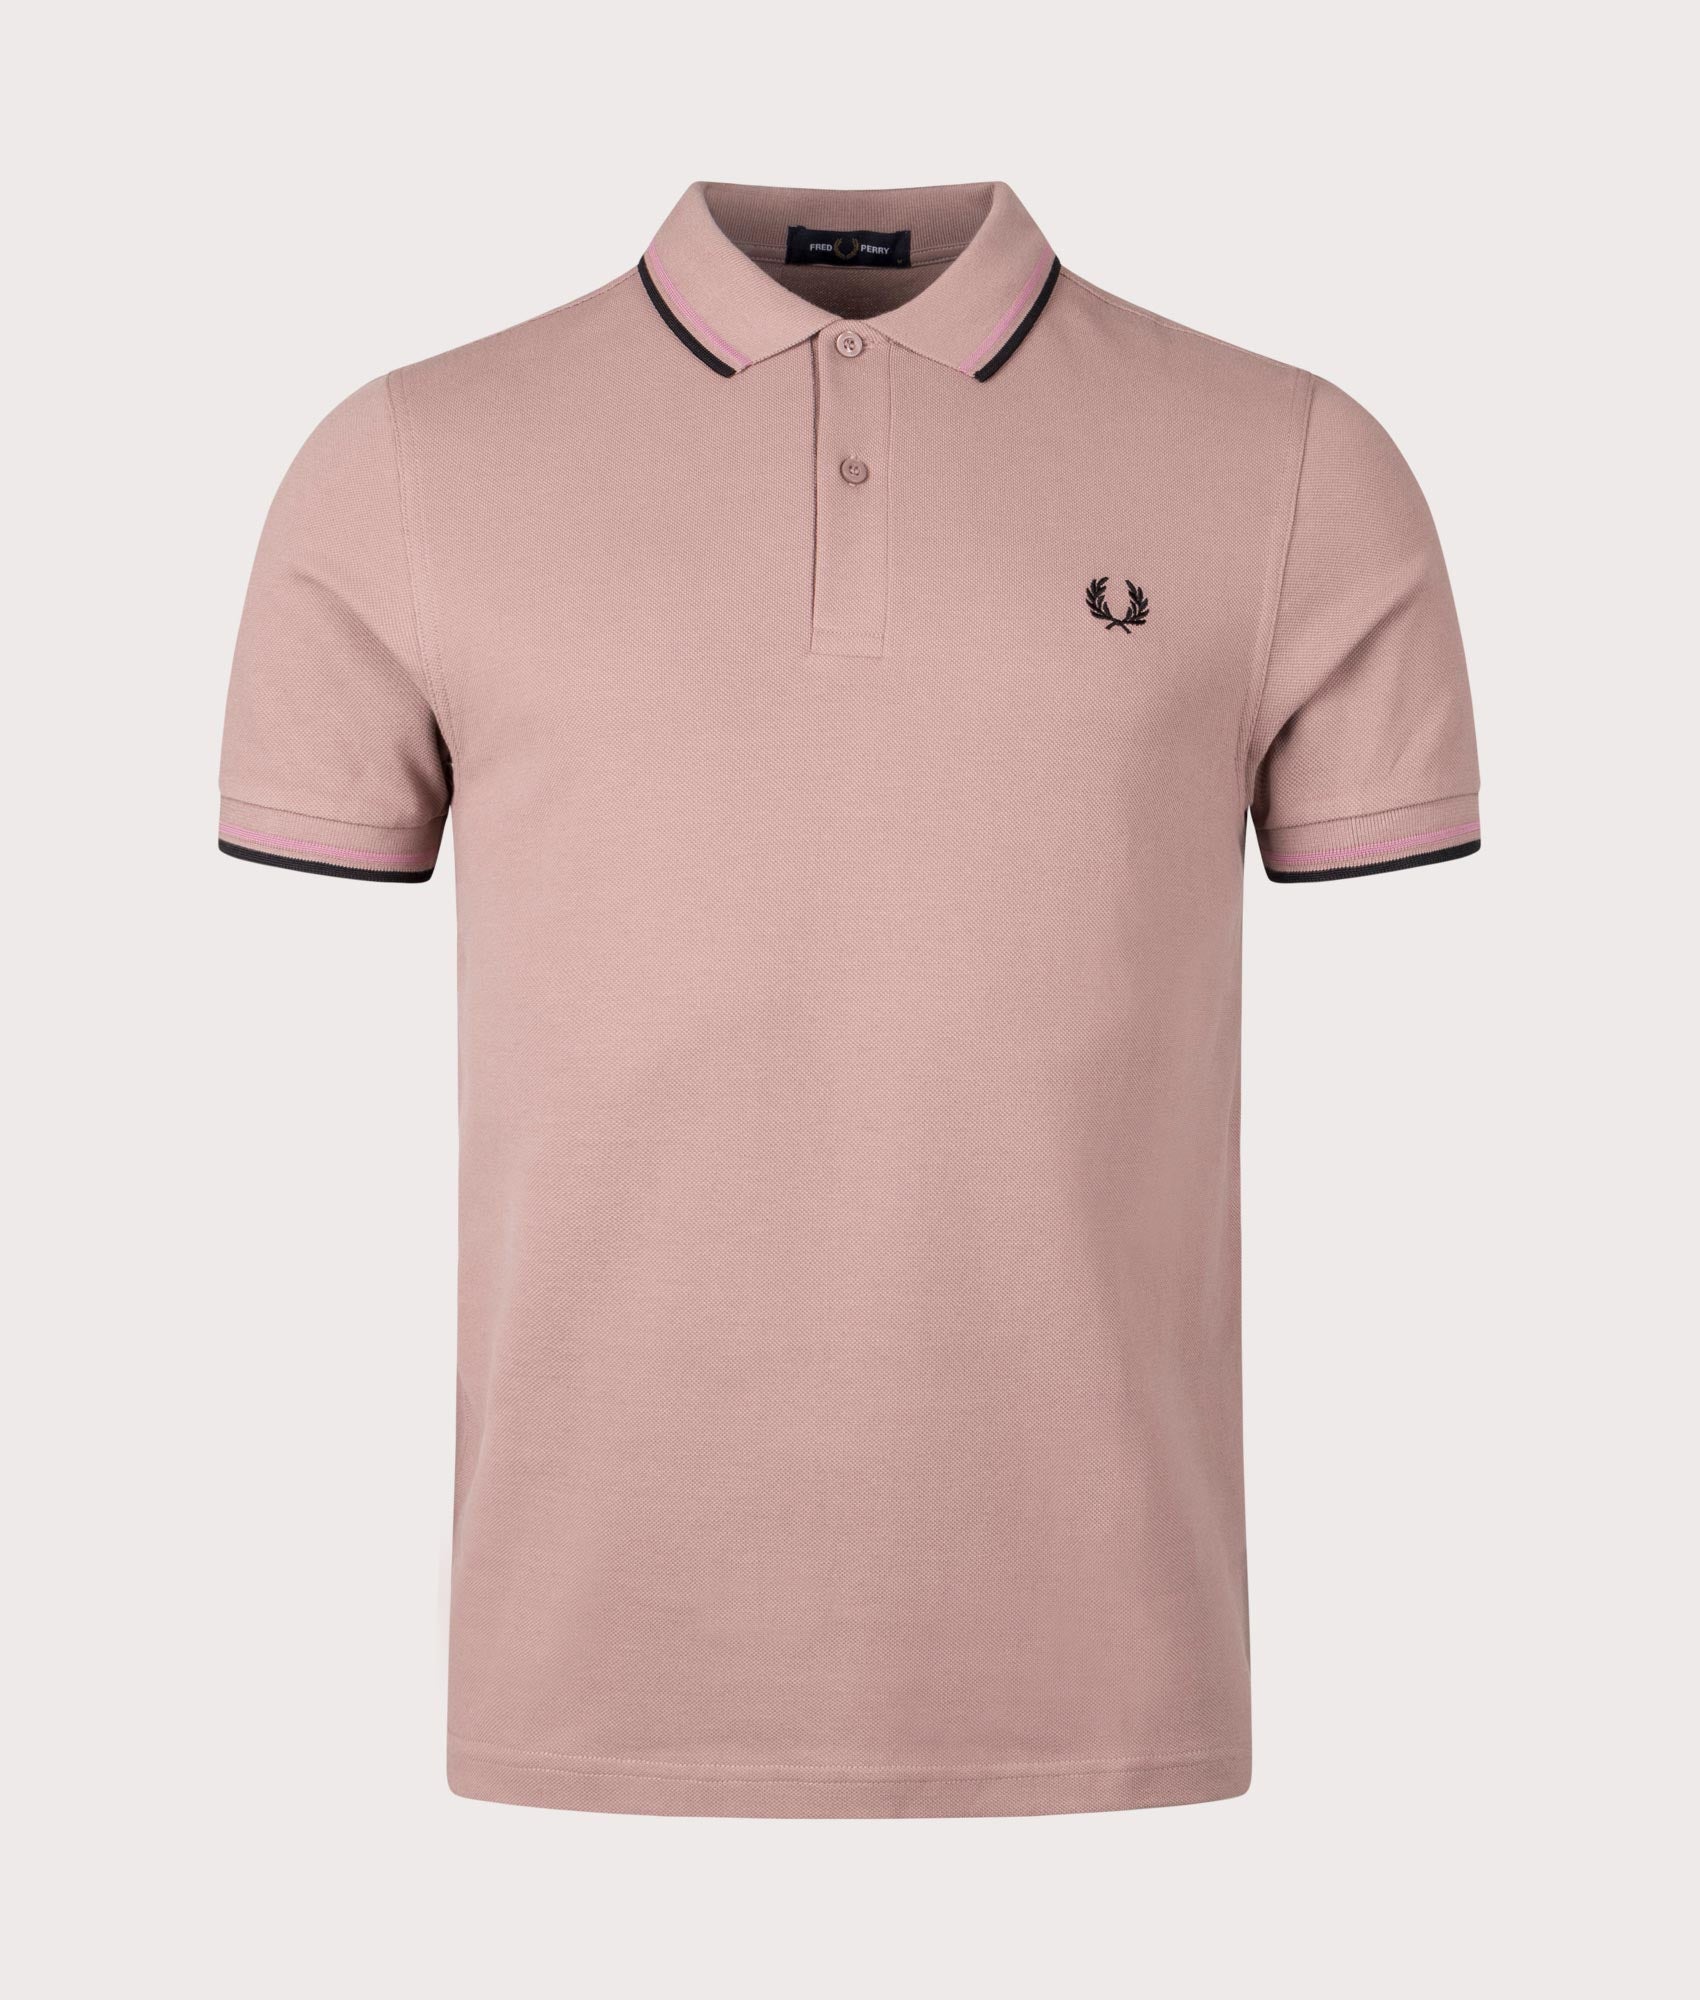 Fred Perry Mens Twin Tipped Fred Perry Polo Shirt - Colour: U89 Dark Pink/Dusty Rose/Black - Size: X